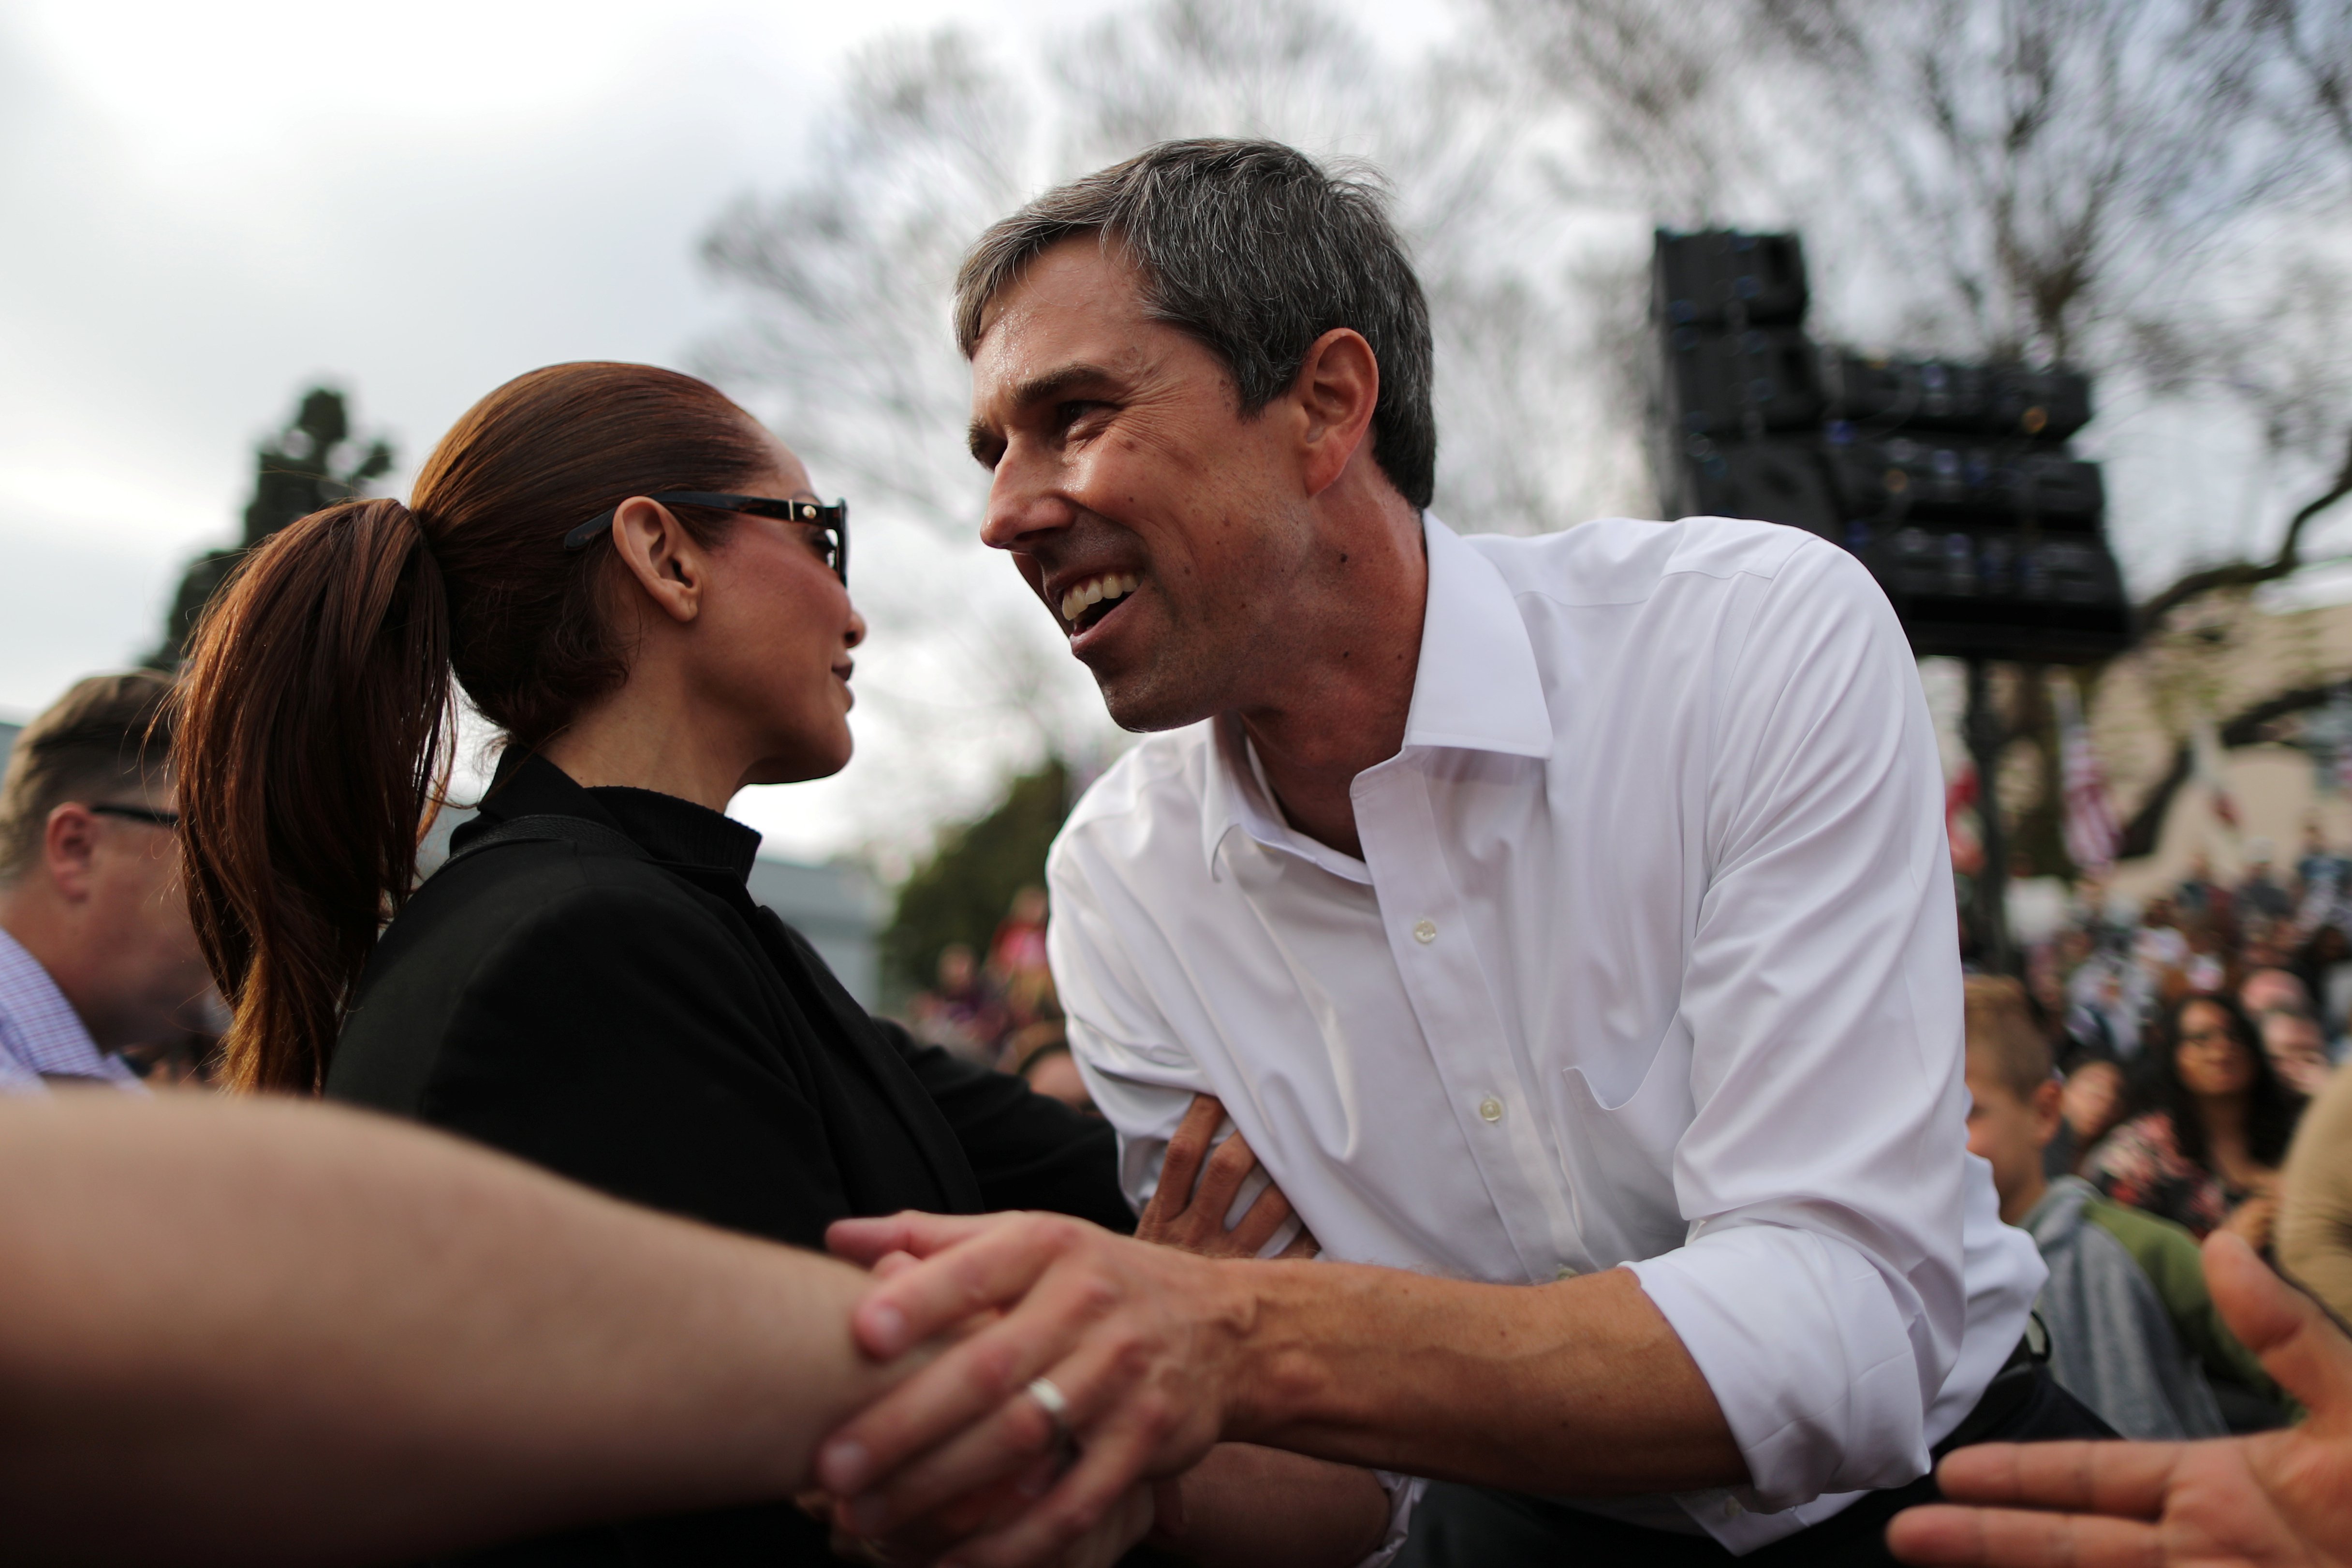 U.S. Democratic presidential candidate Beto O'Rourke greets supporters after speaking at a rally in Los Angeles